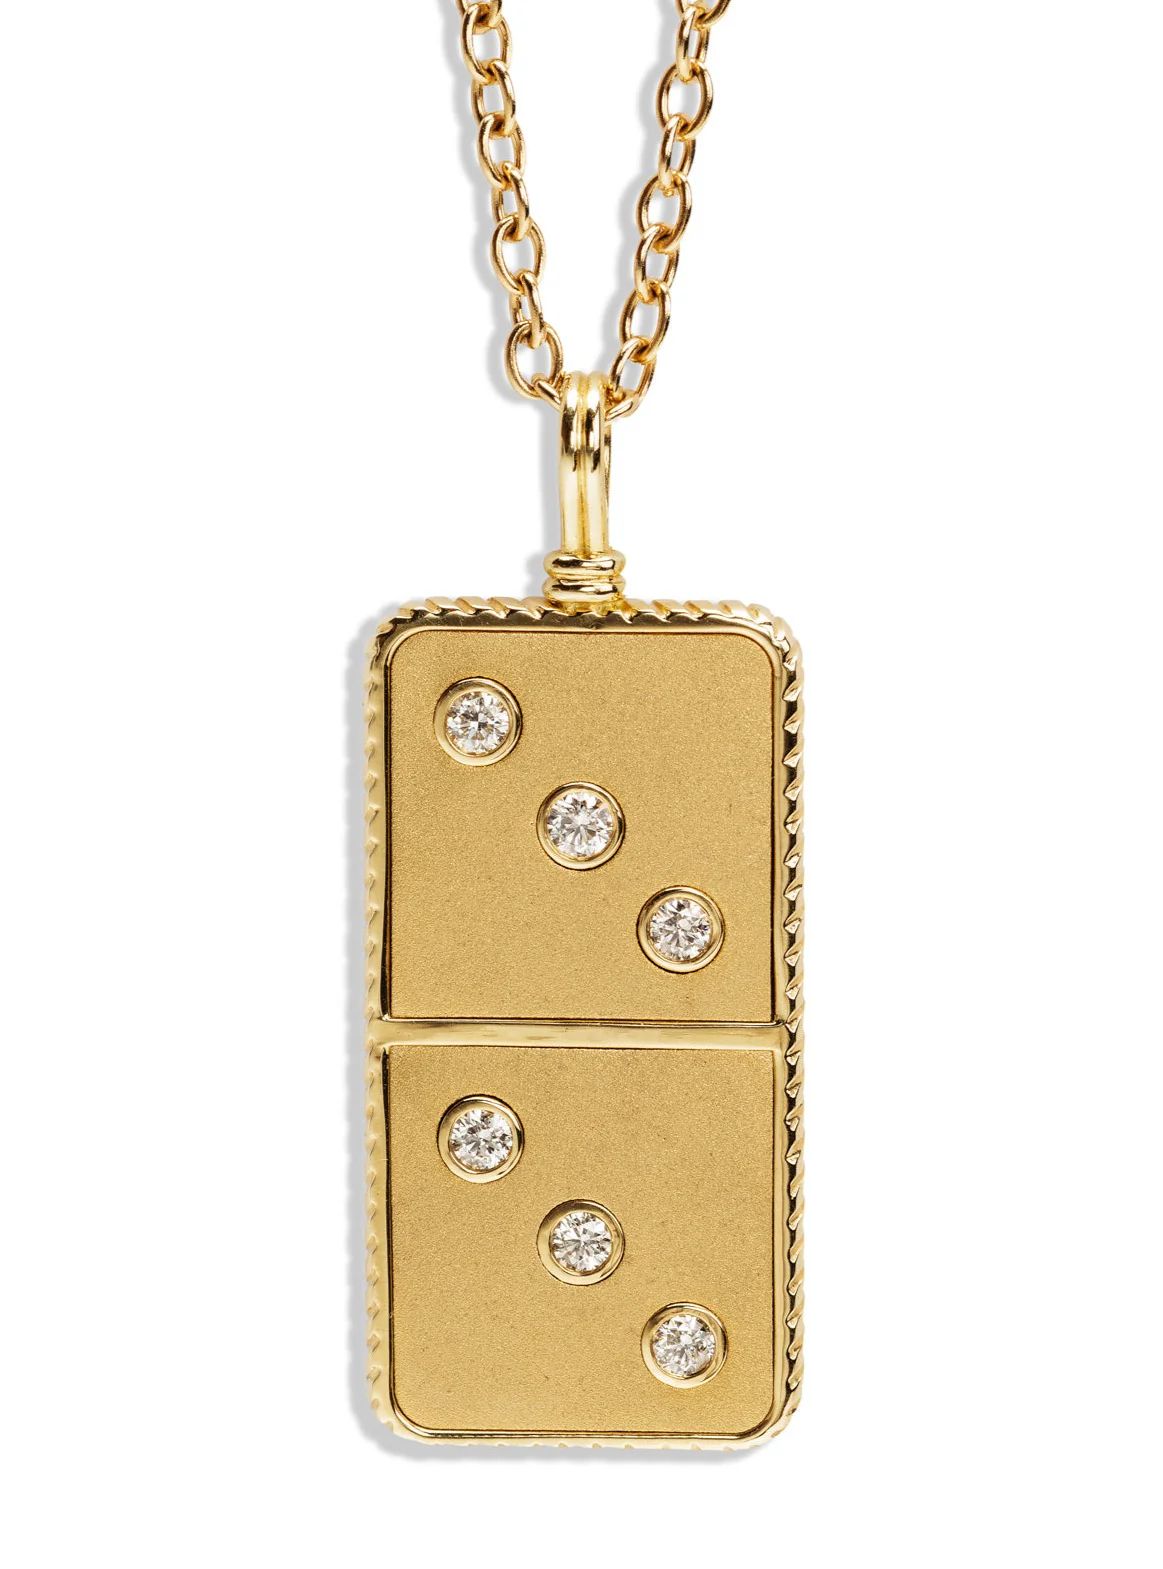 All Gold and Diamond Domino Necklace | YLANG 23